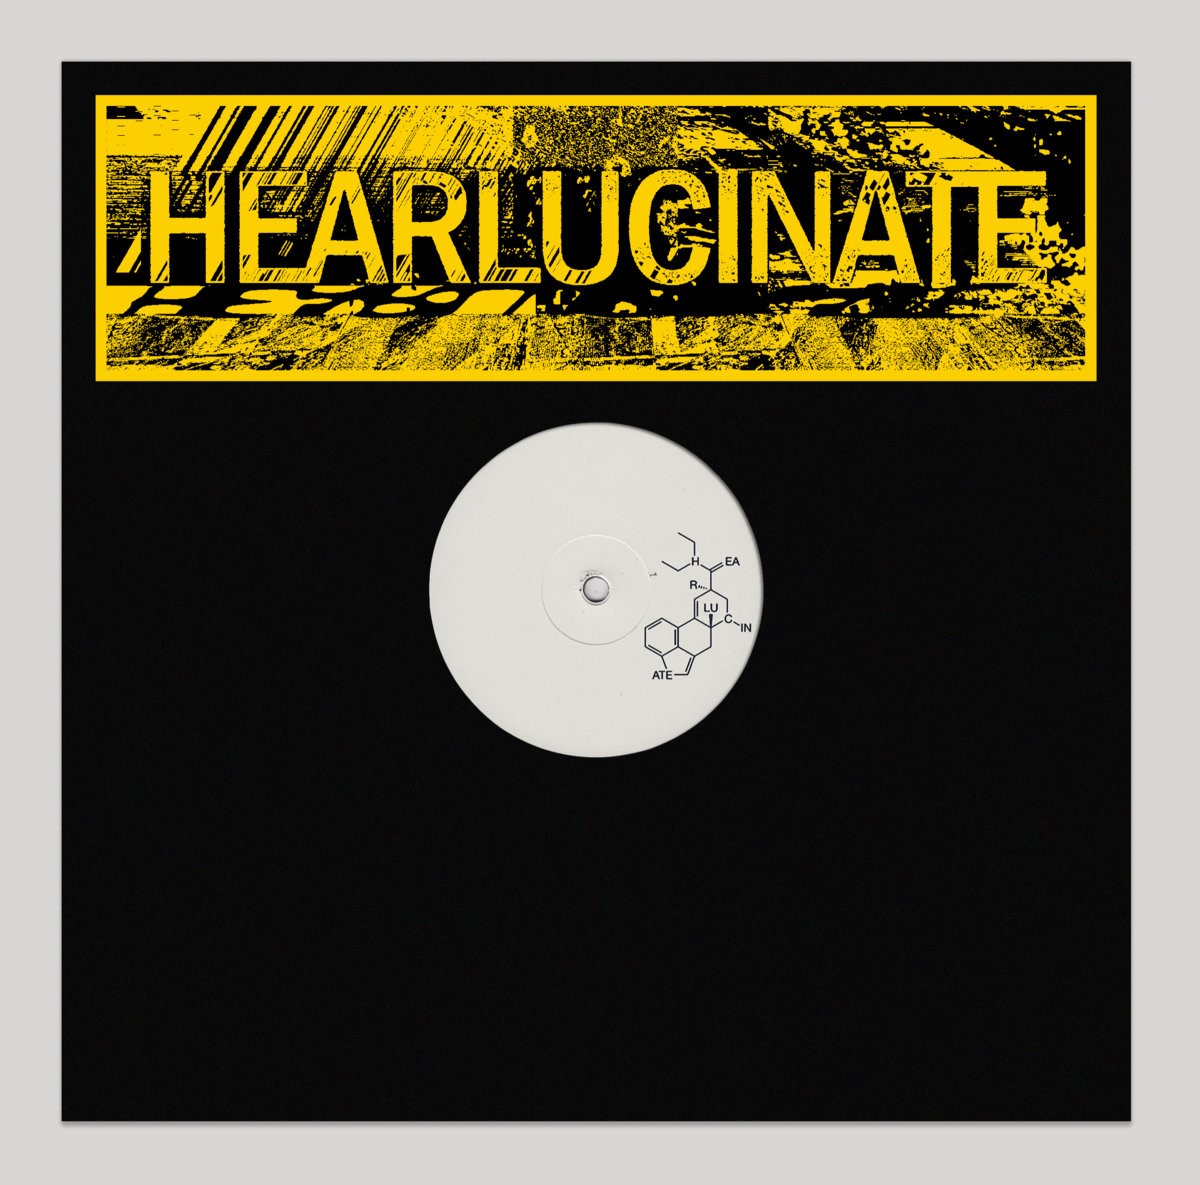 Download Hearlucinate 002 on Electrobuzz